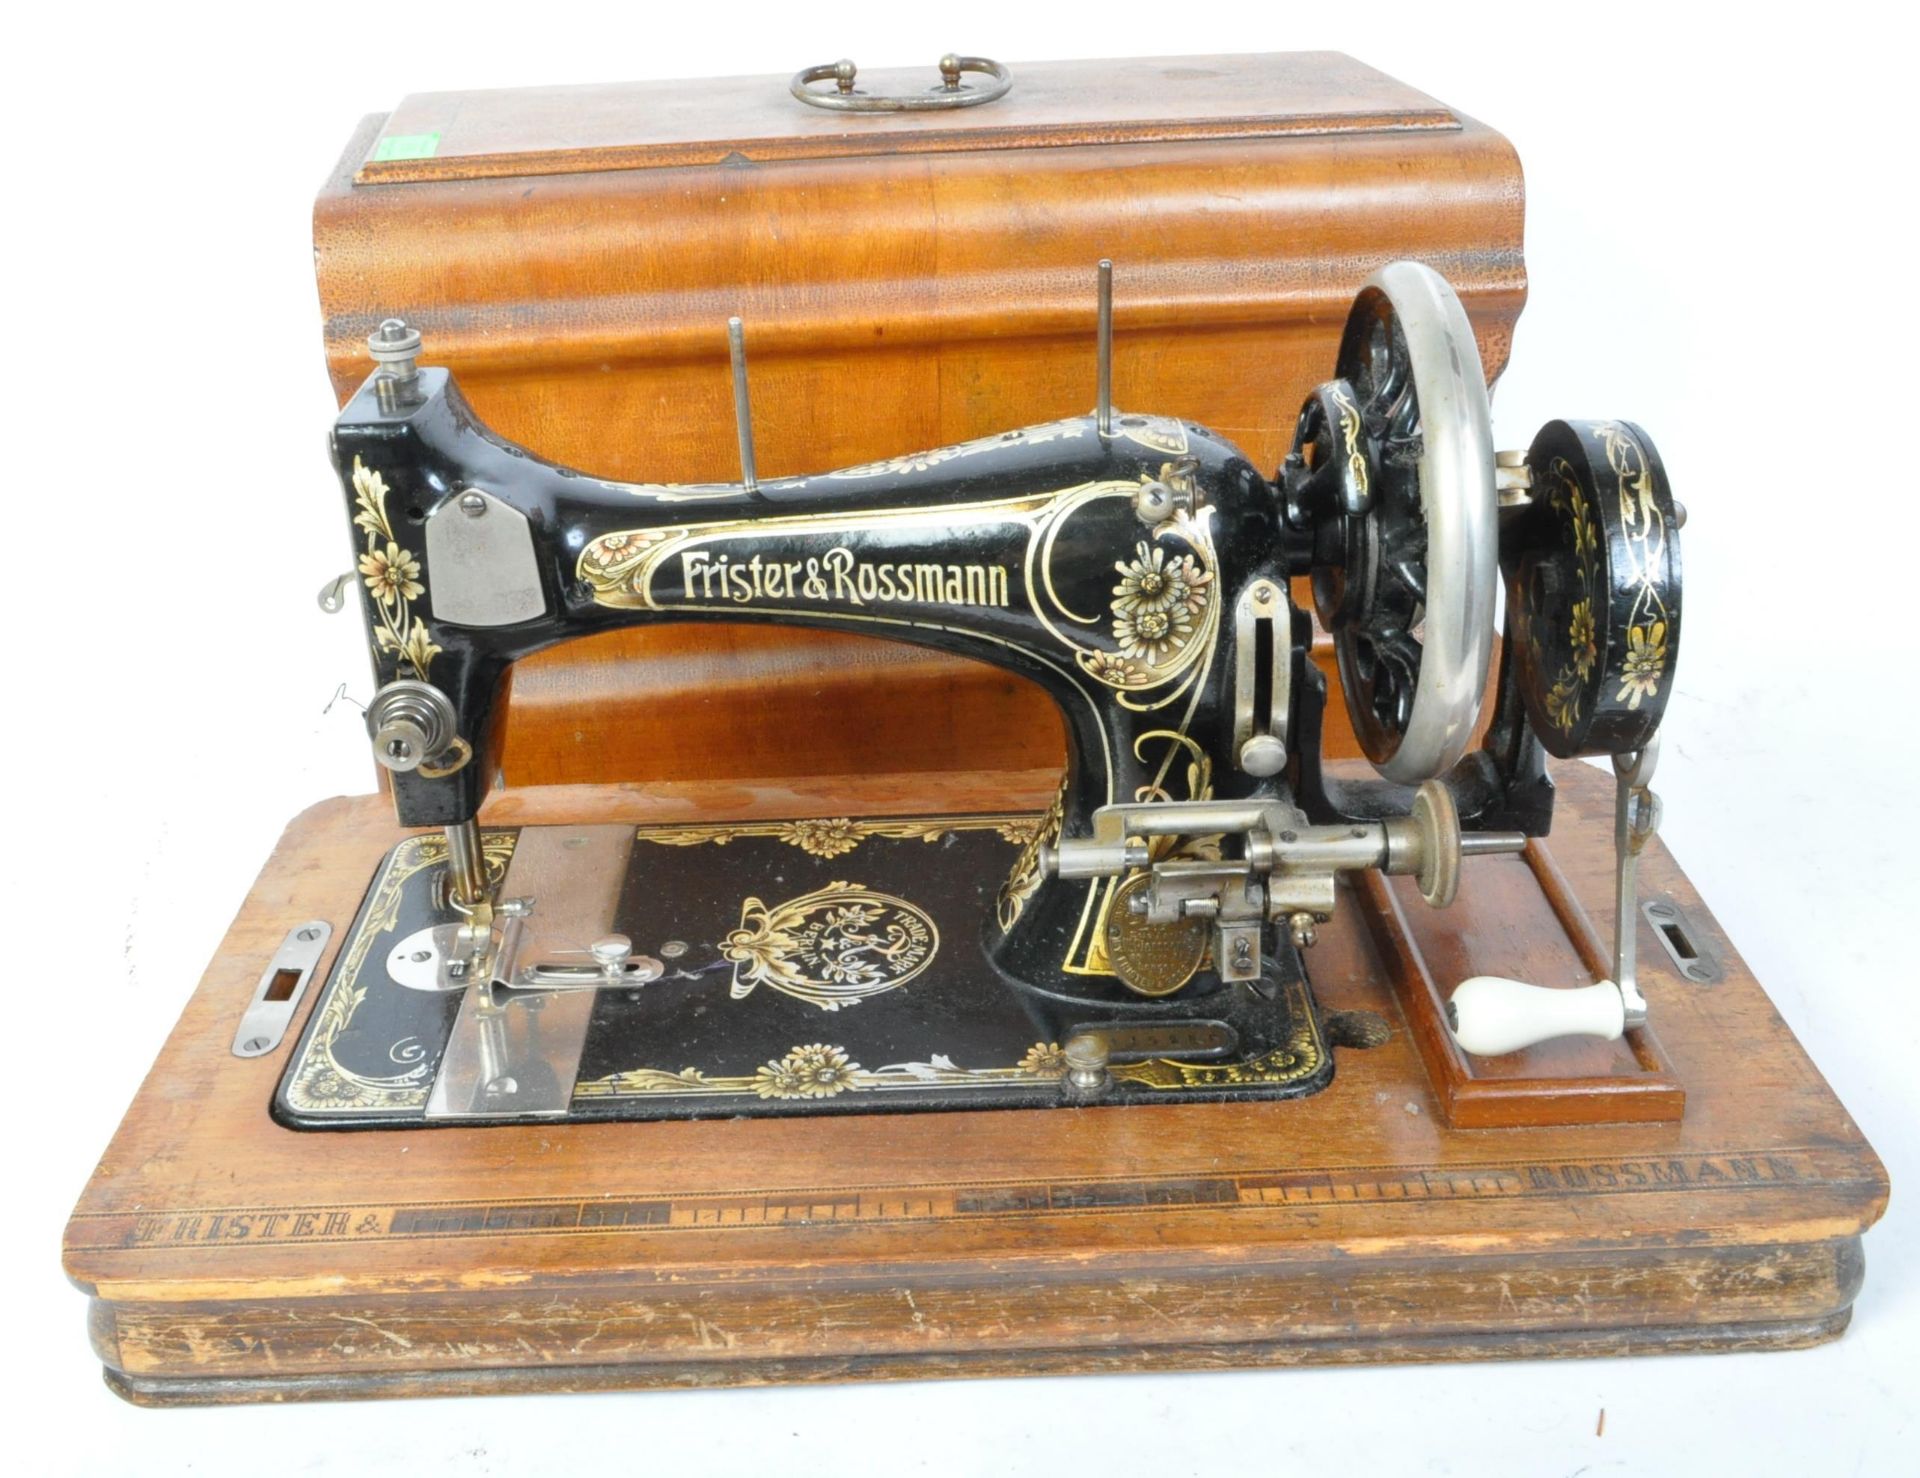 EARLY 20TH CENTURY FRISTER & ROSSMANN SEWING MACHINE IN CASE